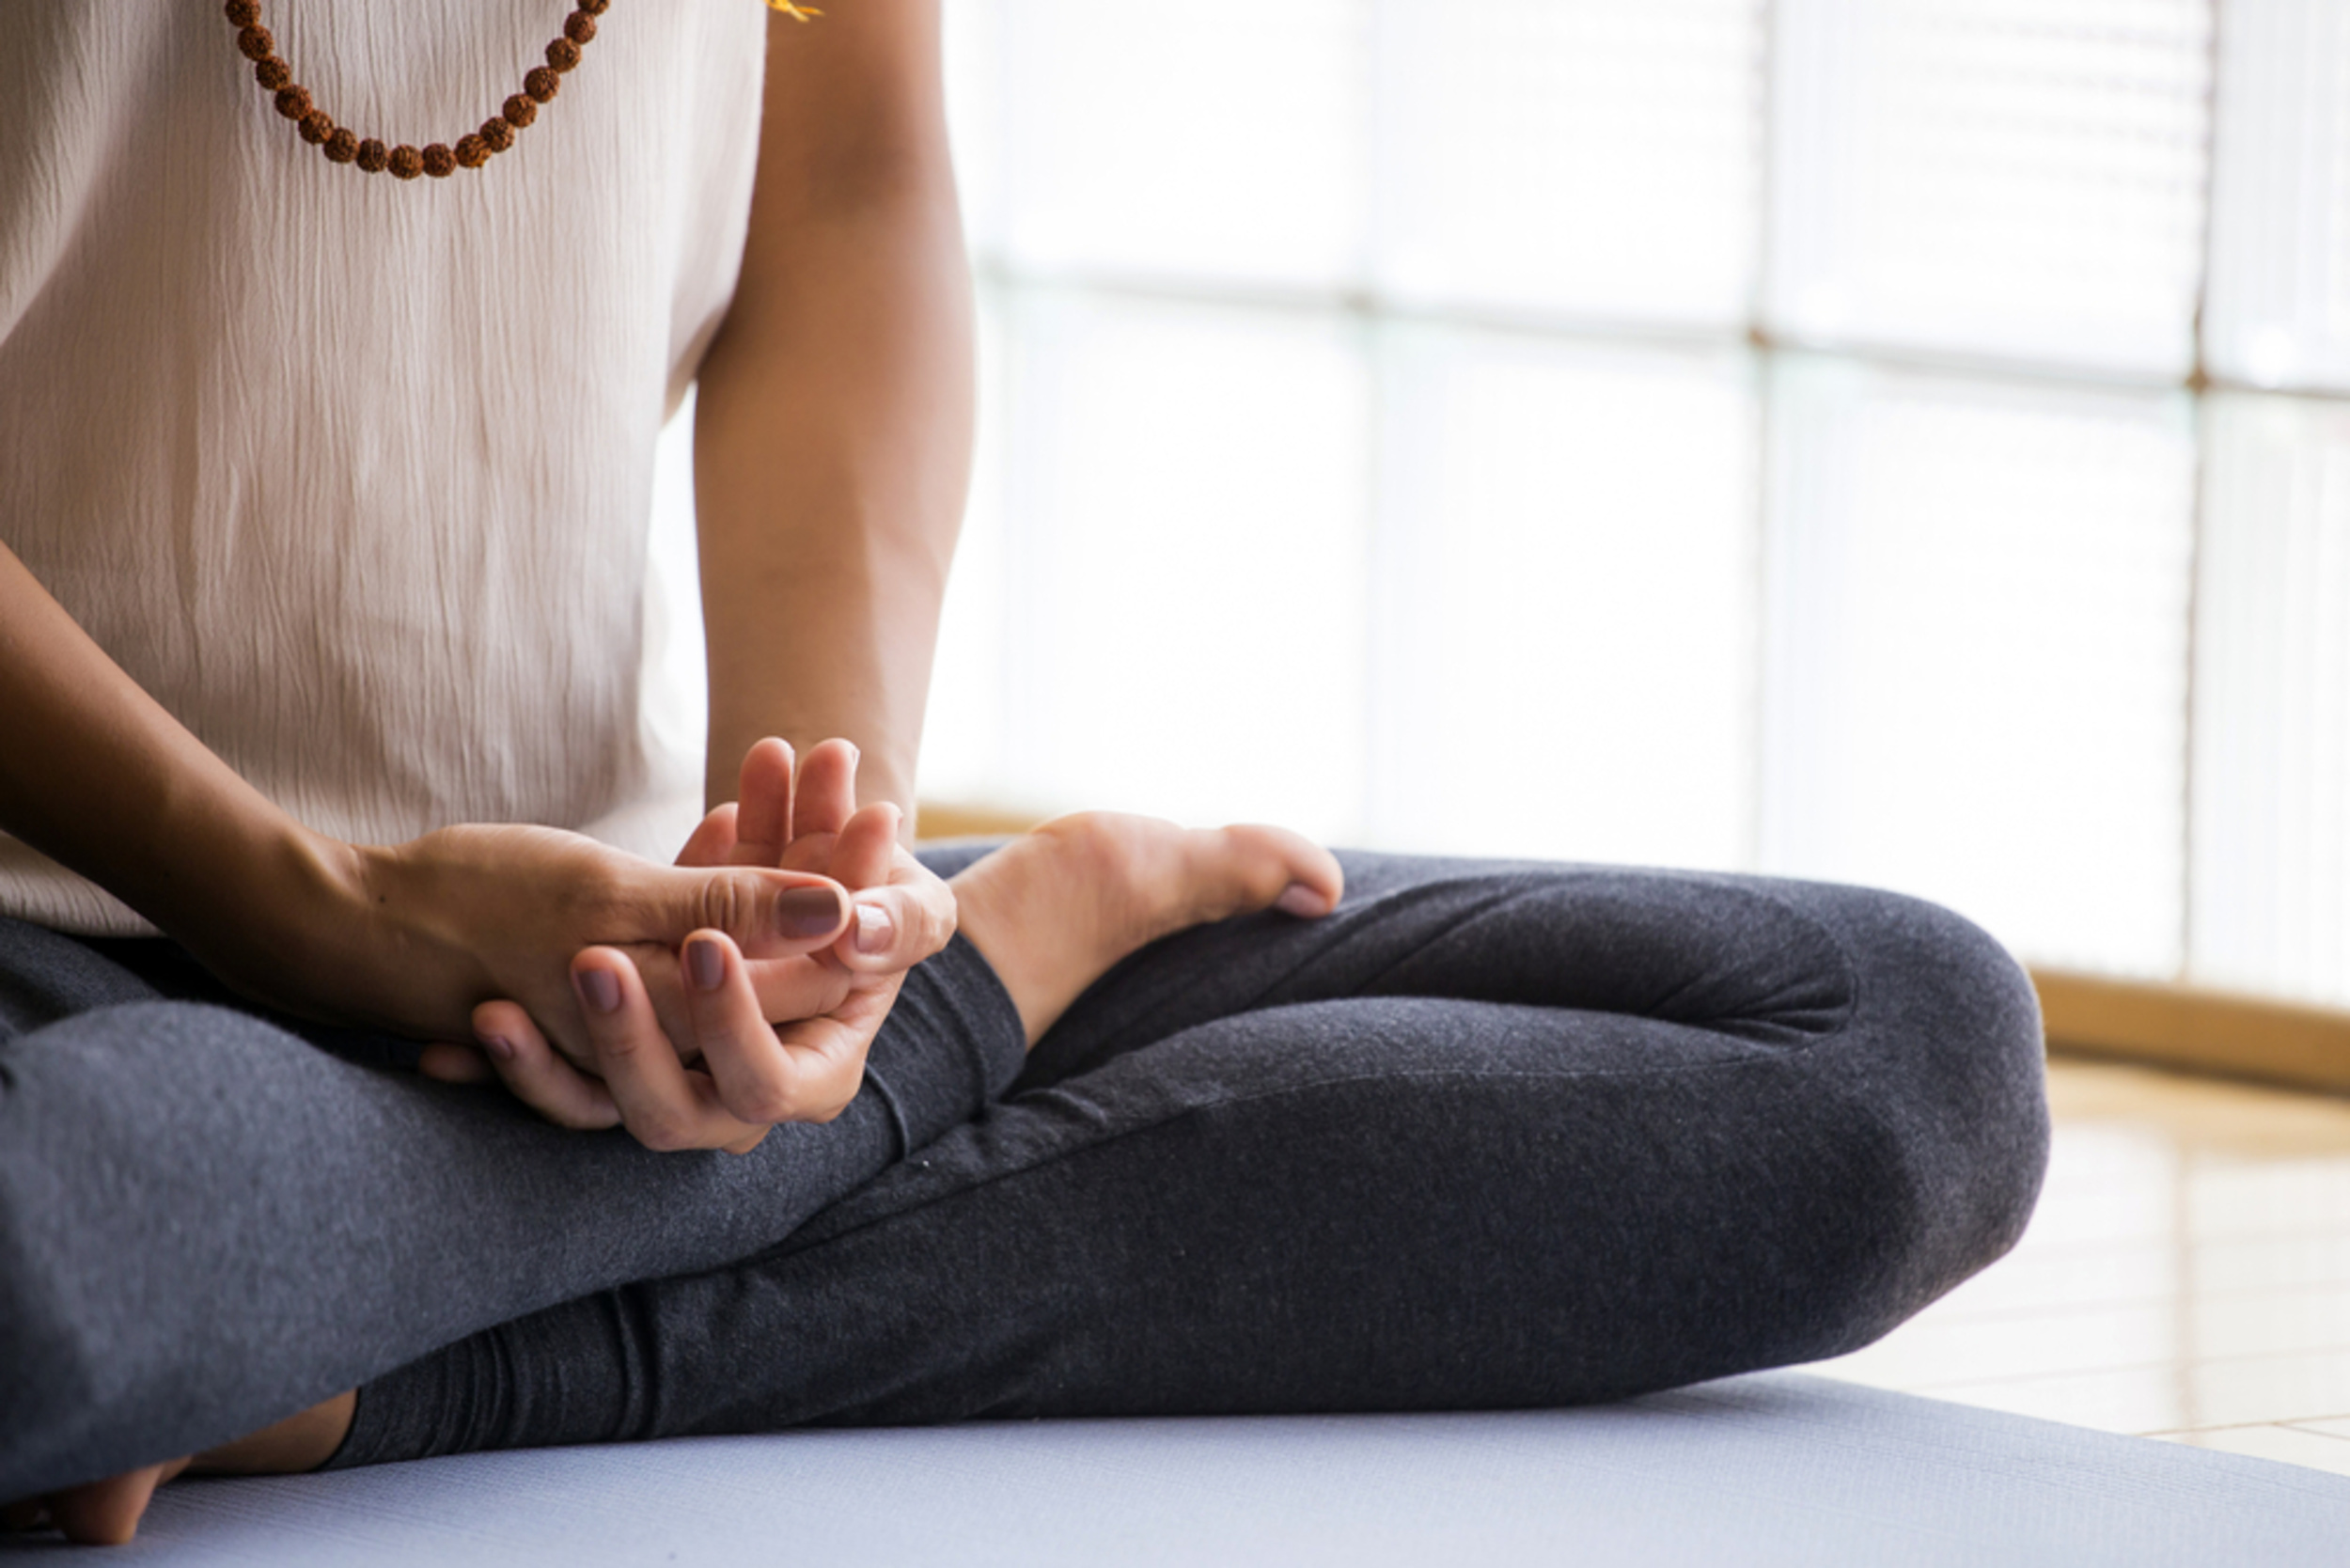 <p>Meditation can work wonders in reducing anxiety and stress, and it's easy to start a practice within the privacy of your own home. Find guided meditations online for reducing stress or help getting to sleep, or consider an app like Calm to help you build a consistent meditation schedule. </p><p><a href='https://www.msn.com/en-us/community/channel/vid-cj9pqbr0vn9in2b6ddcd8sfgpfq6x6utp44fssrv6mc2gtybw0us'>Follow us on MSN to see more of our exclusive lifestyle content.</a></p>